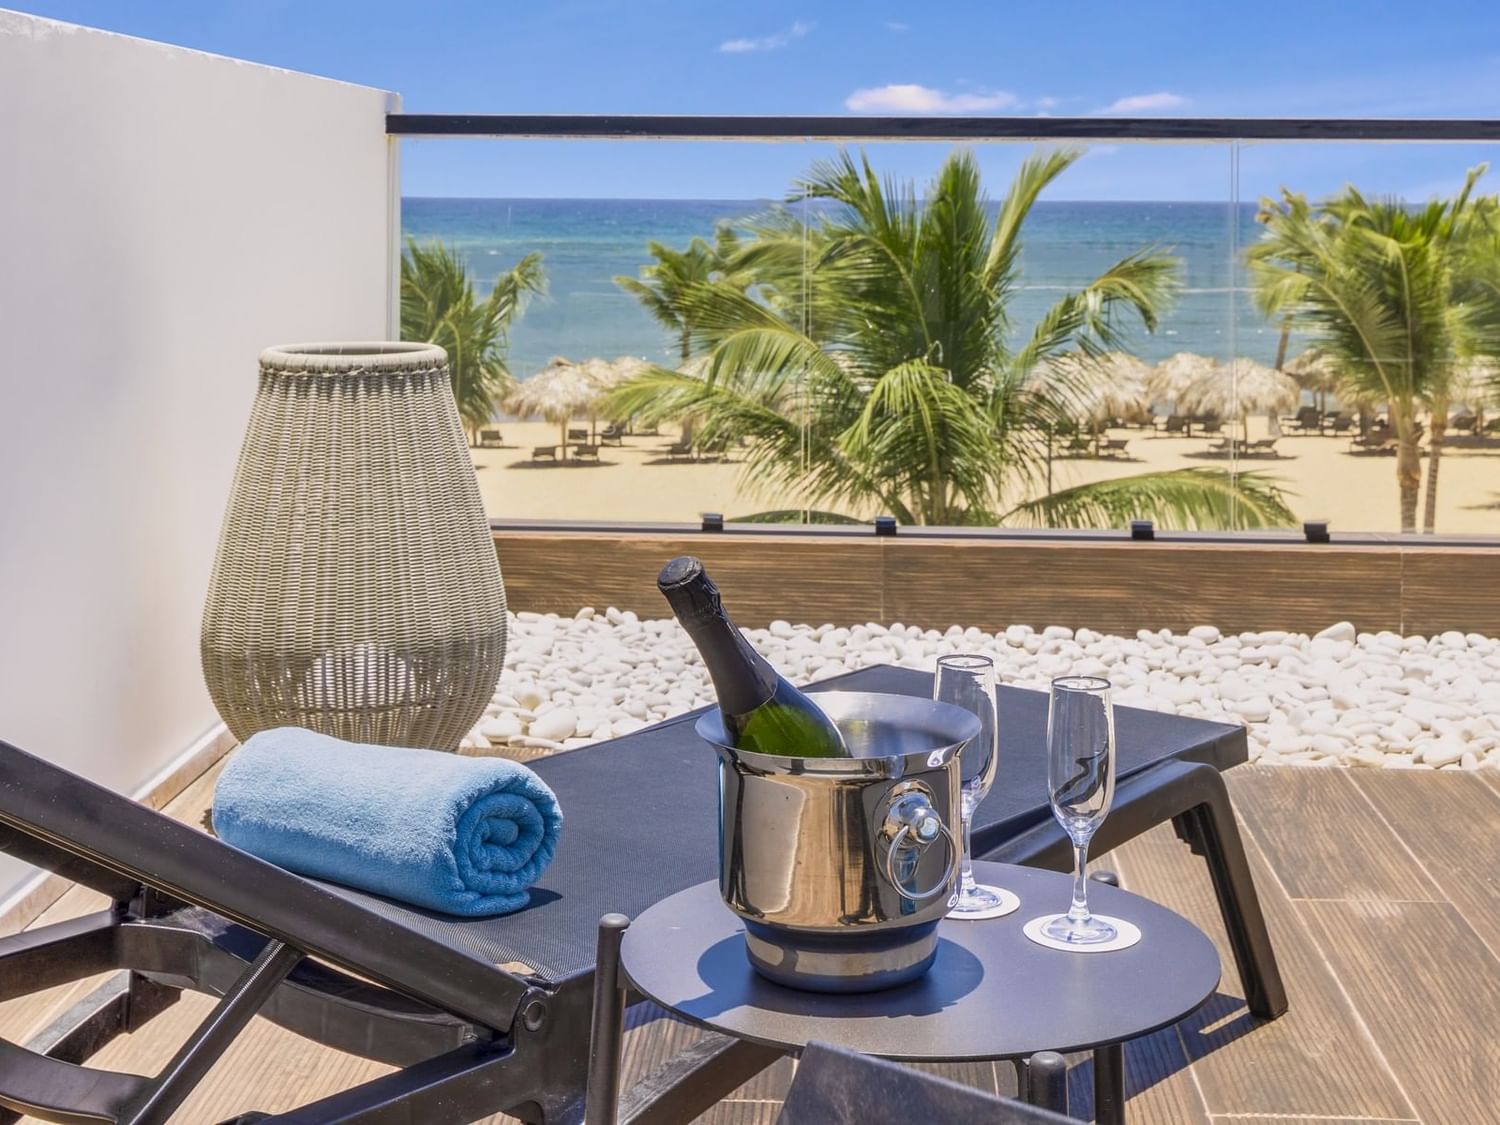 Champagne bottle and glasses arranged on table by lounger in a balcony overlooking the sea at Live Aqua Punta Cana